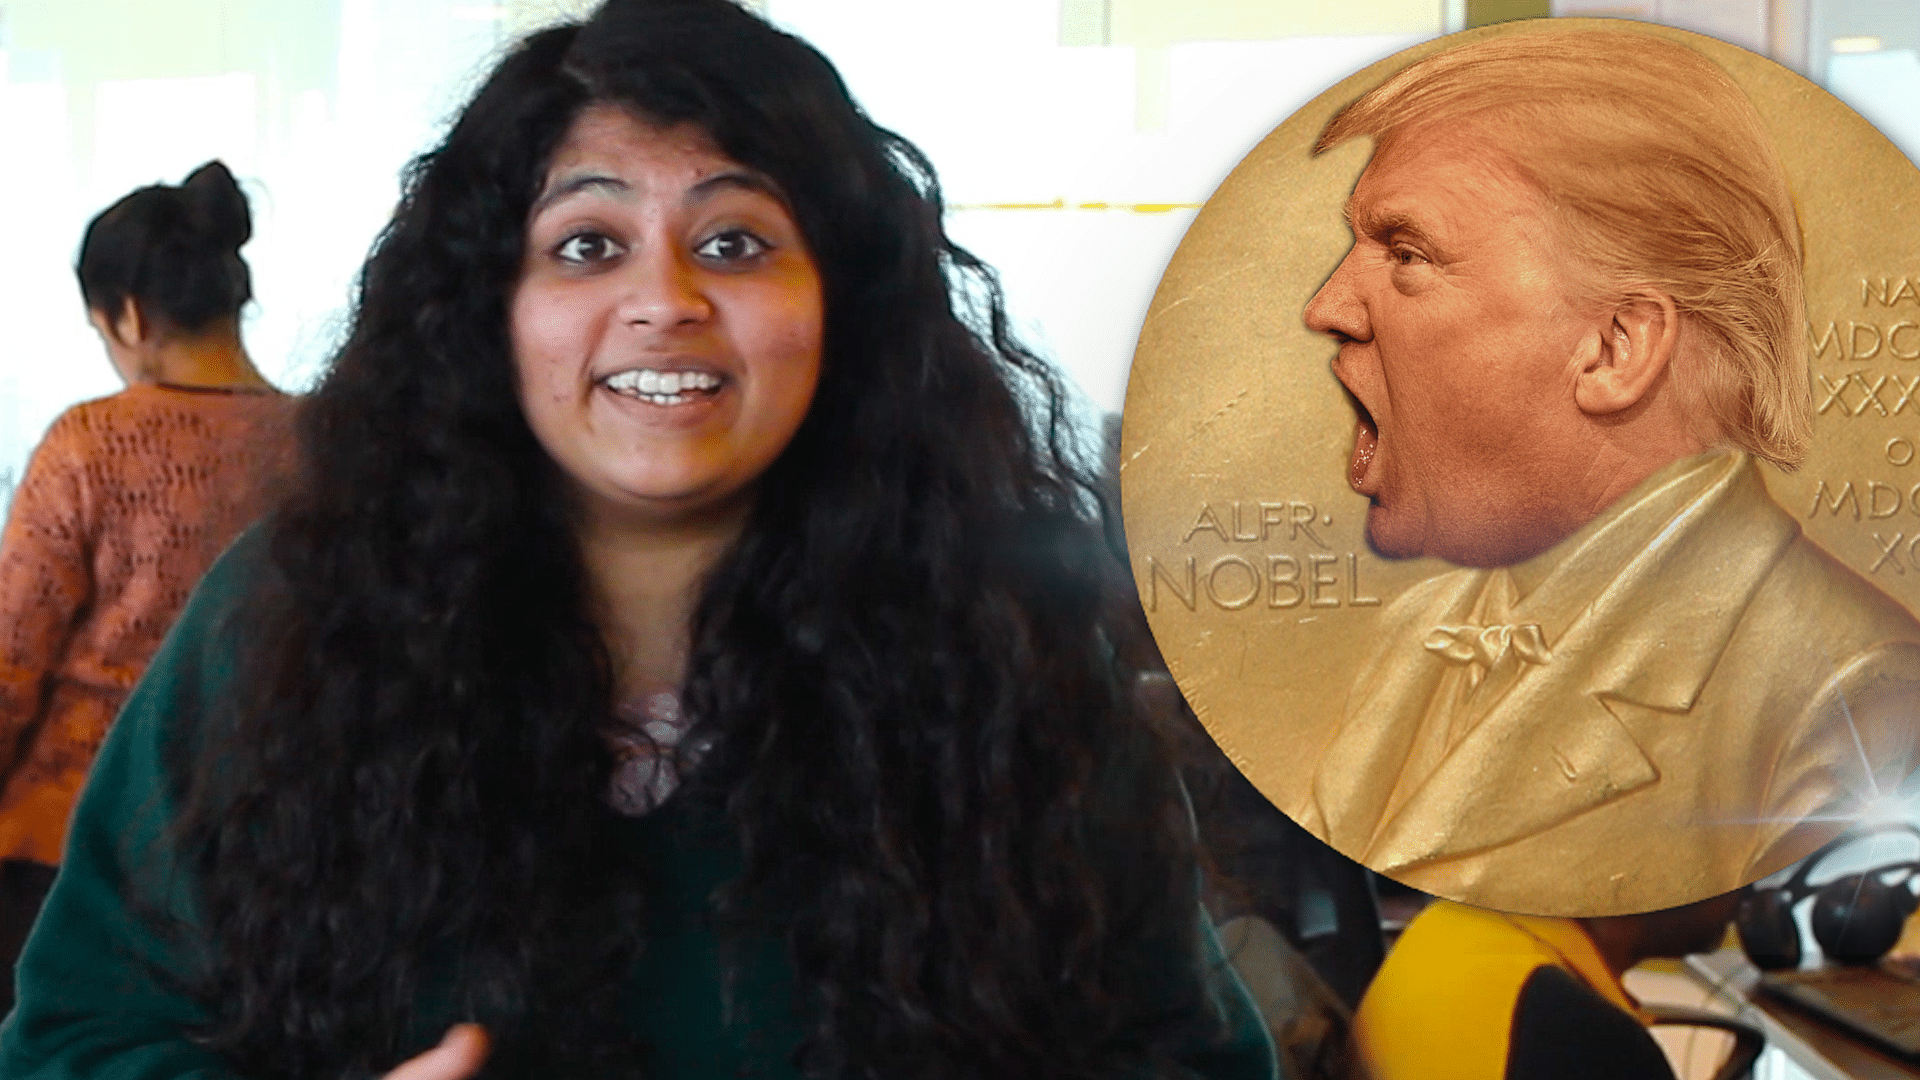 The Quint cannot digest the fact that Donal Trump has been nominated for the Nobel Peace Prize. (Photo: <b>The Quint</b>)